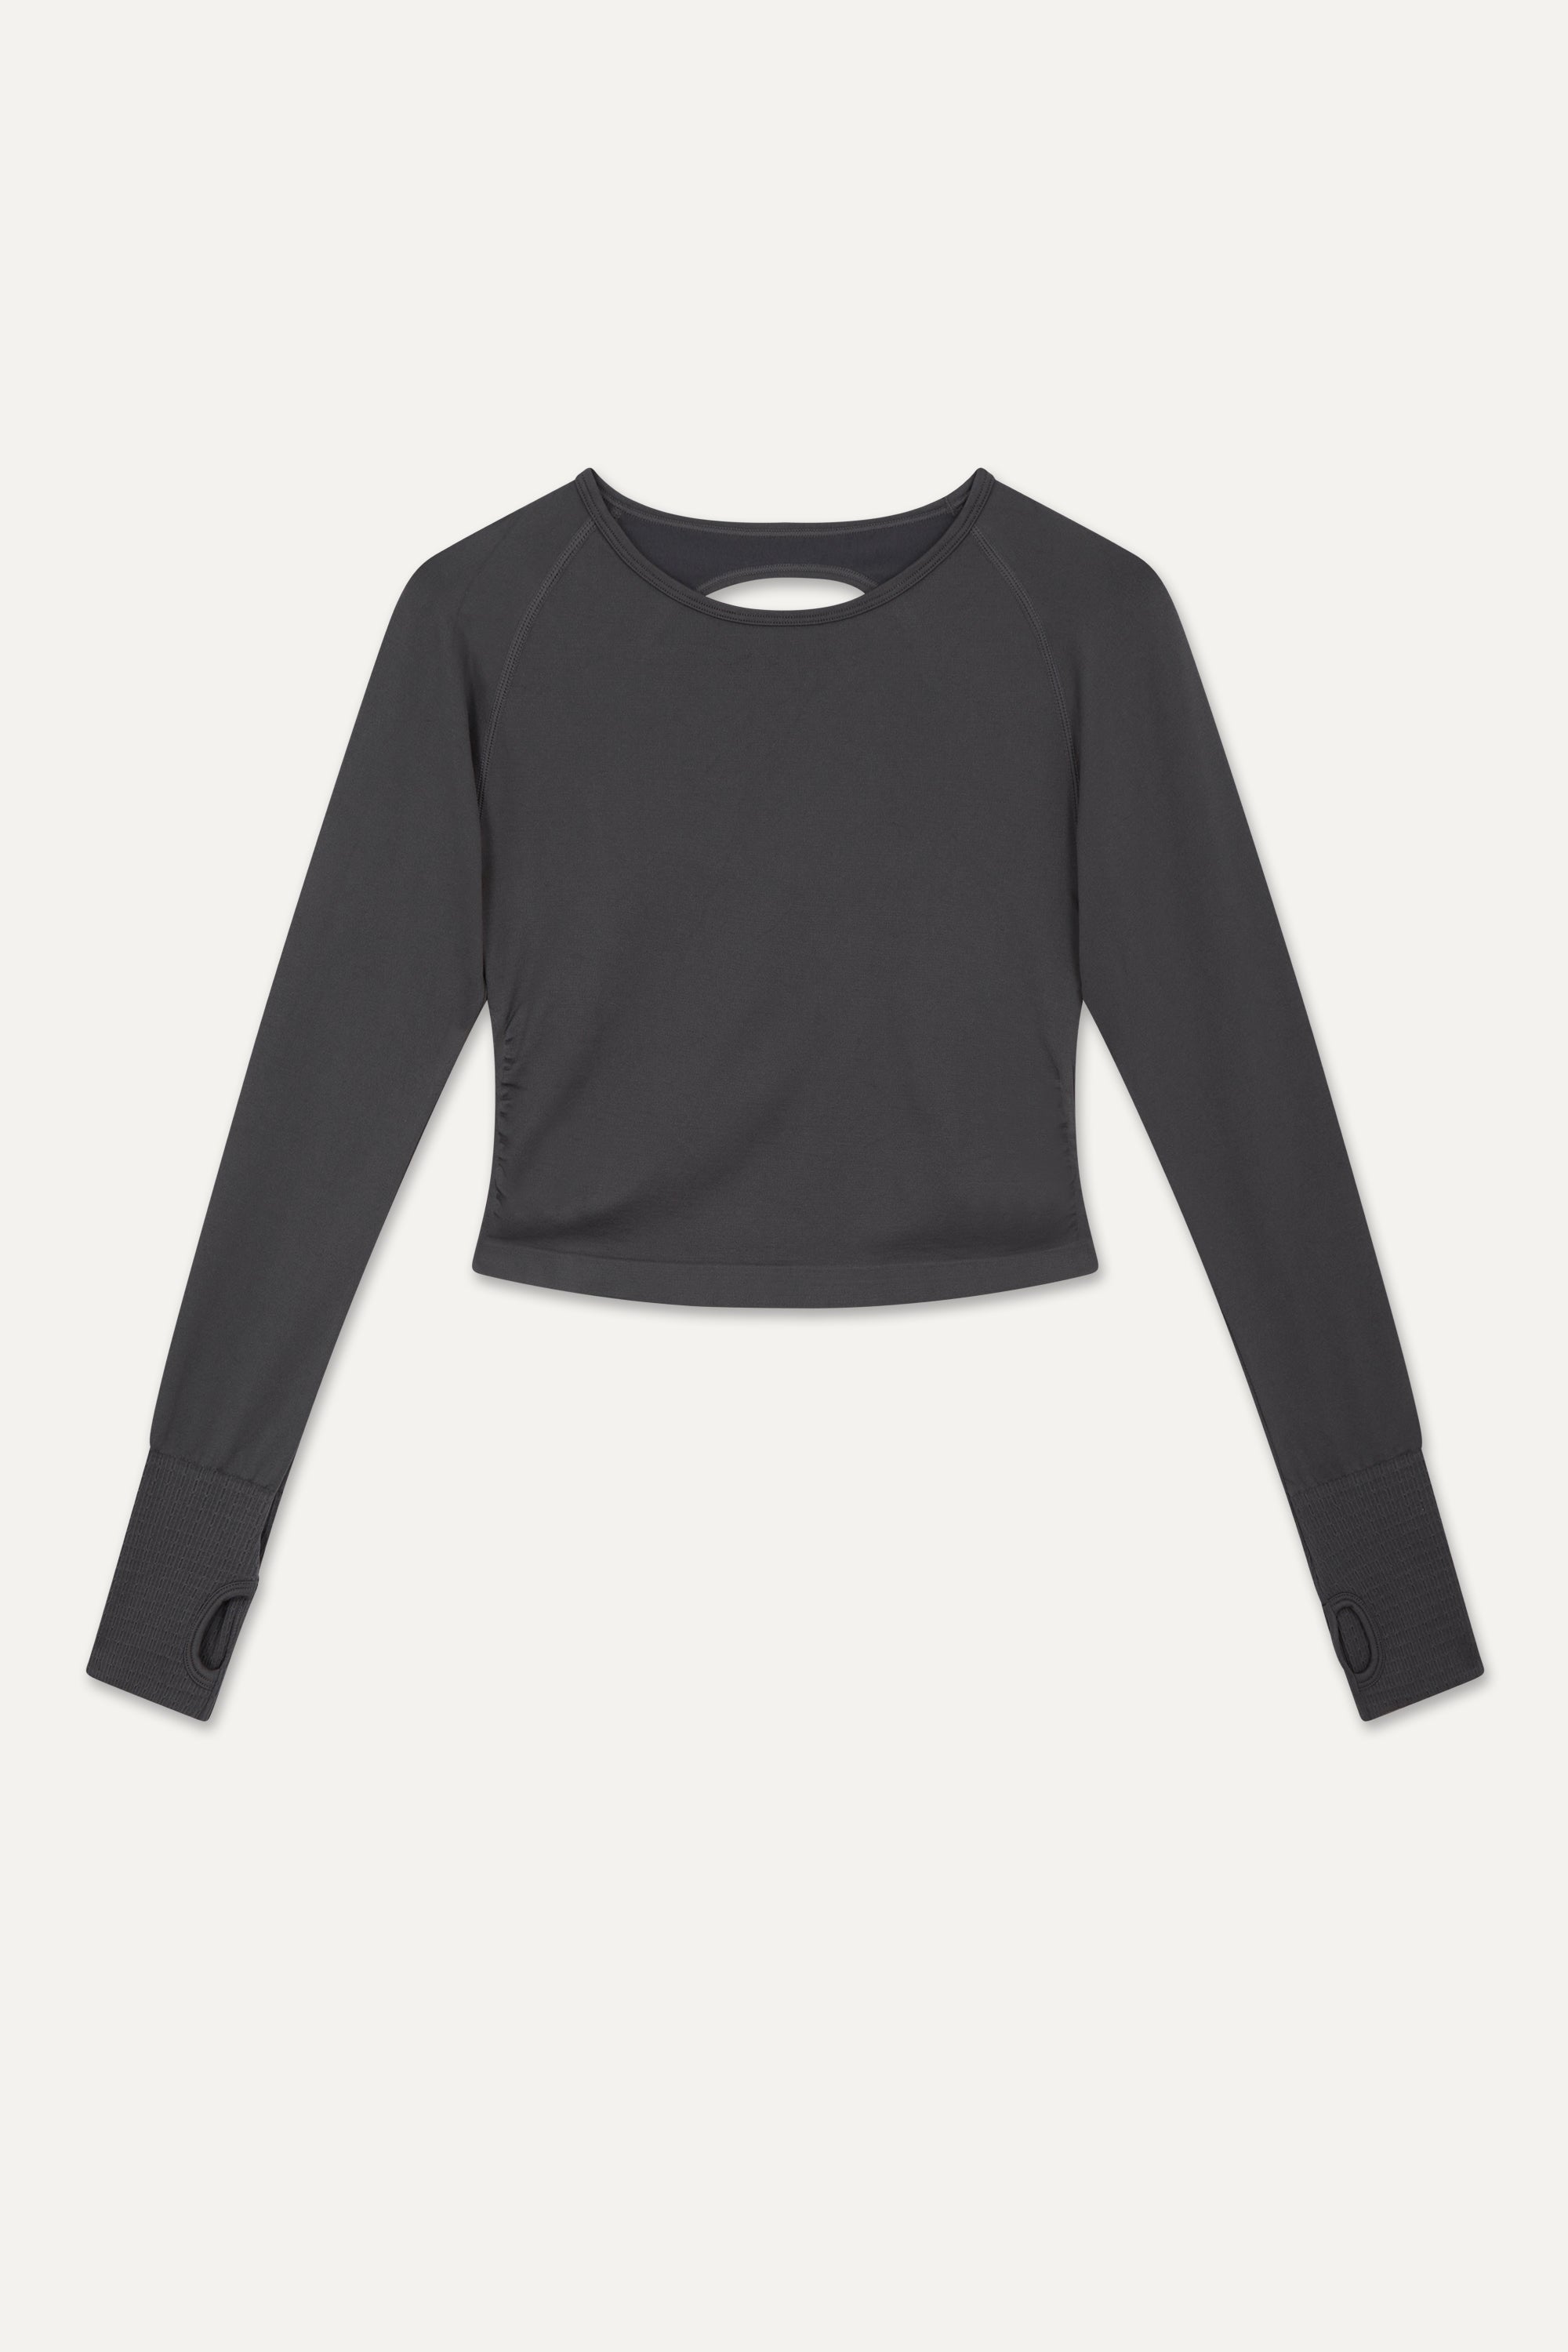 Black long sleeve recycled crop top with black leggings from sustainable women's activewear brand, Jilla.